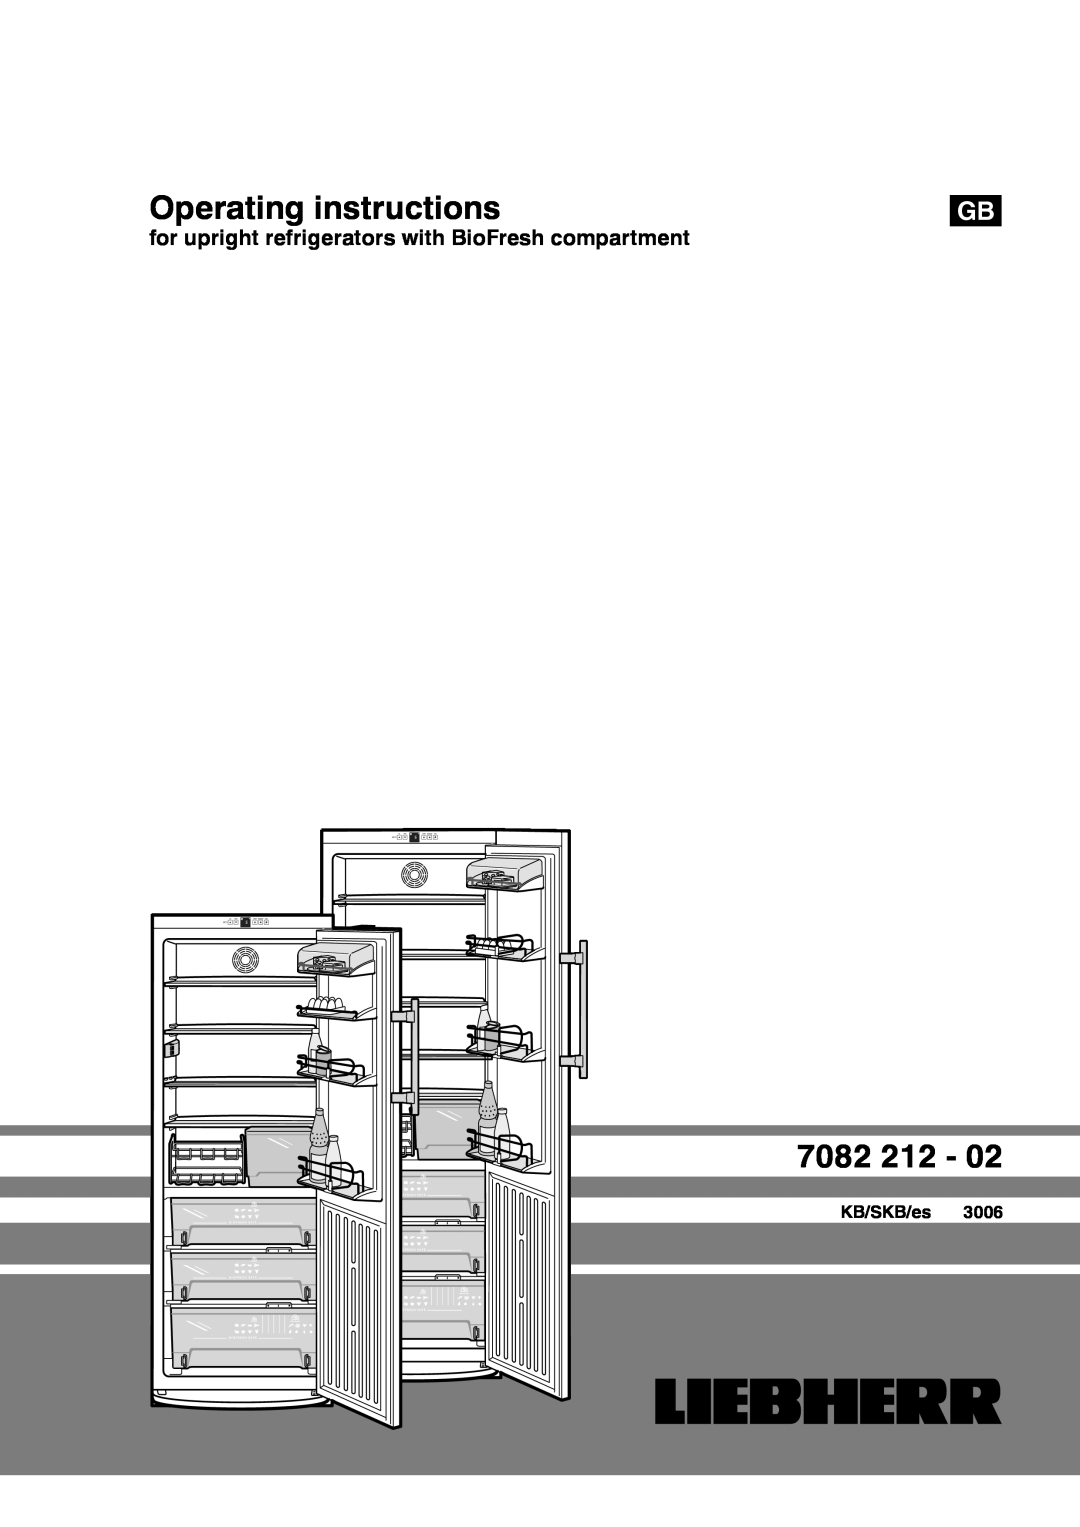 Liebherr 7082 212-02 manual Operating instructions, for upright refrigerators with BioFresh compartment, KB/SKB/es 